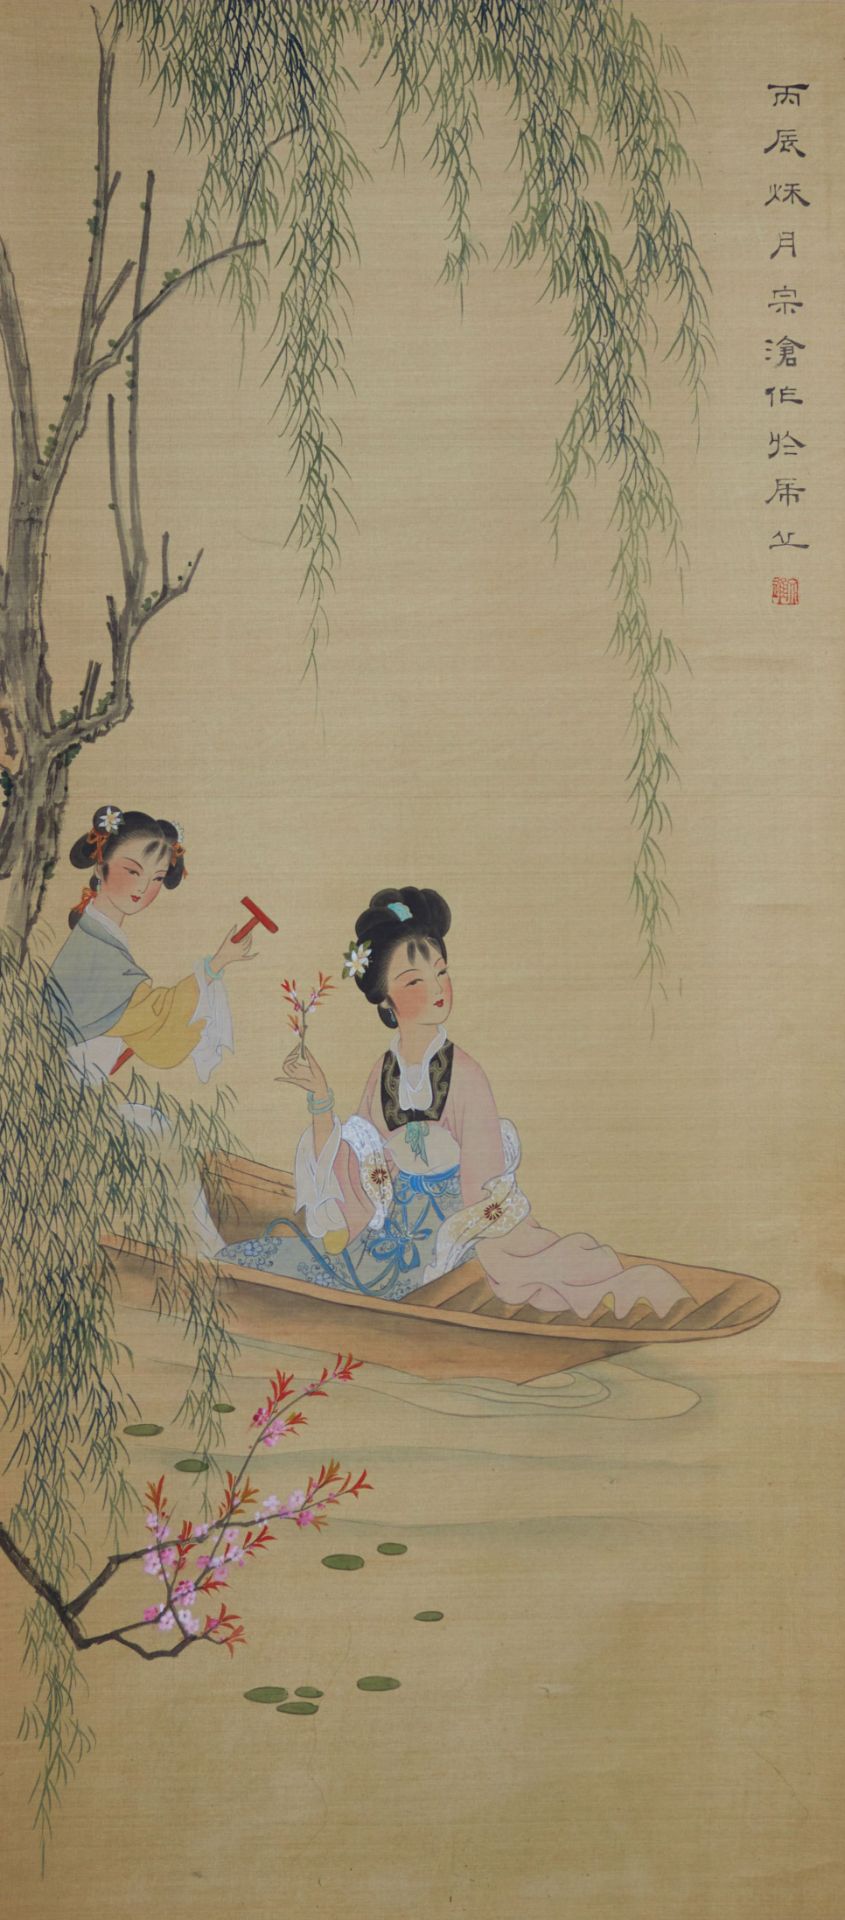 Chinese scroll, water-based painting on silk. Seal: Wen Jin. The turn of the 19th-20th centuries.